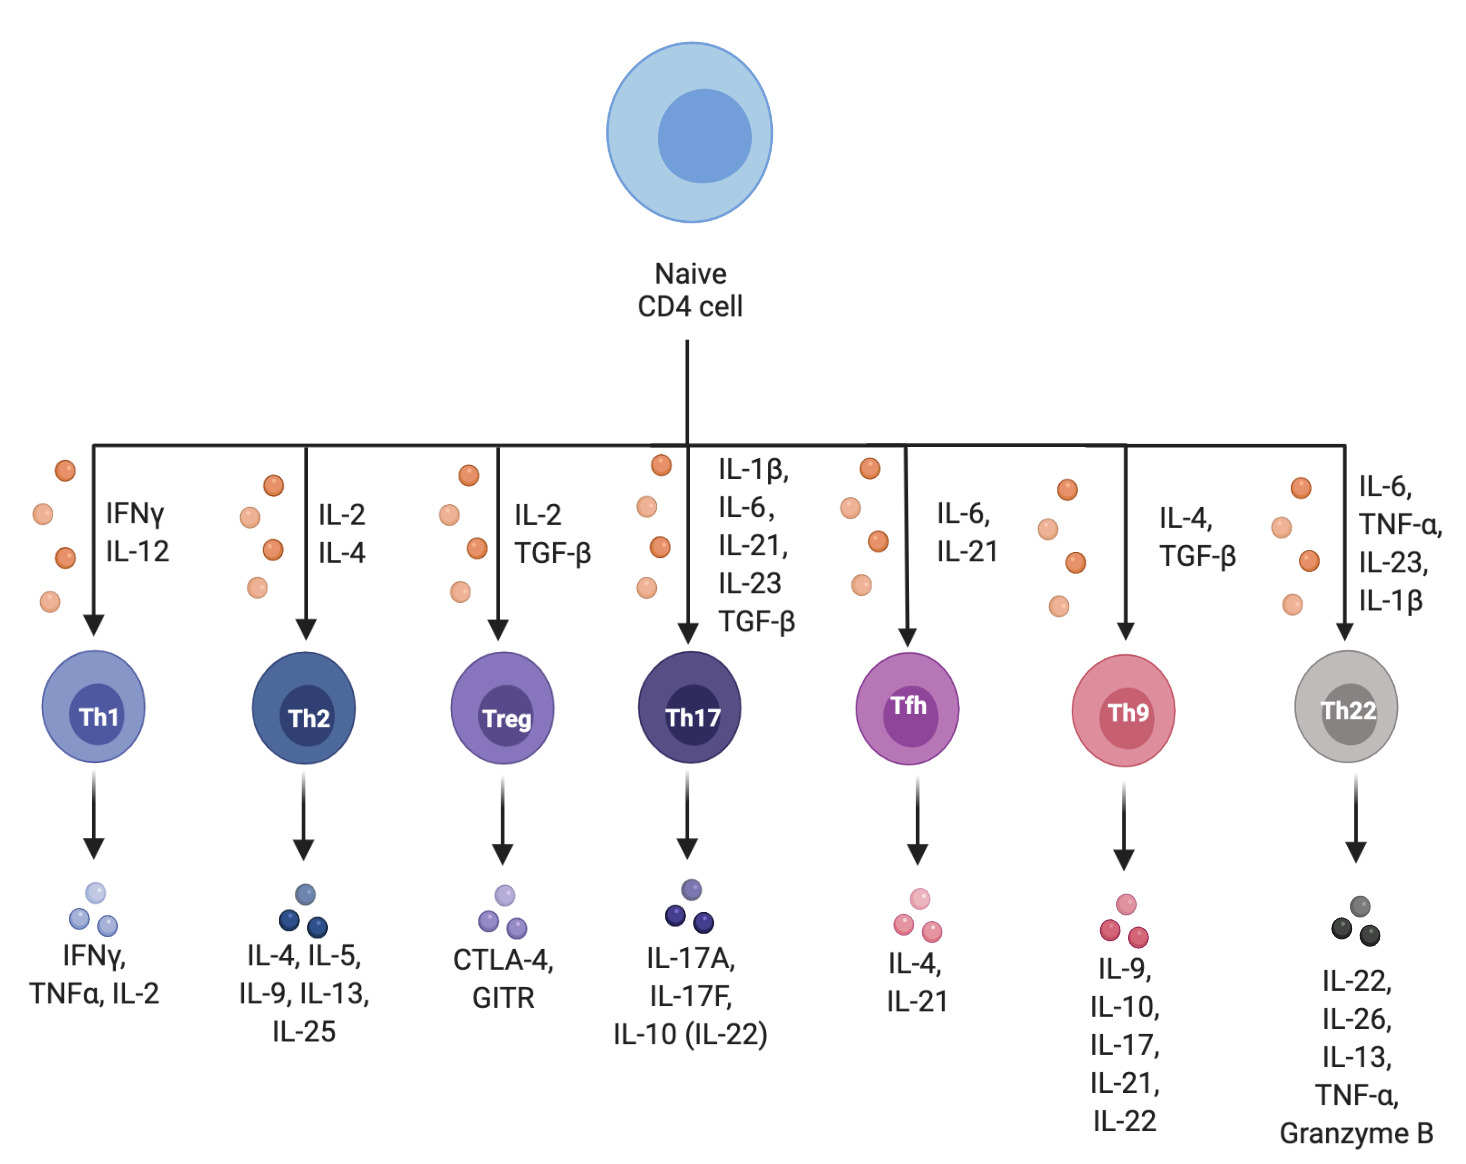 Fig. 2 
            The differentiation of the naïve CD4+ T cell. Naïve CD4 T cells differentiate into distinct T helper subpopulations upon activation, producing spectrum-specific cytokines. Depending on their cytokine profile, different types of Th cells exist. Th1 major cytokine products are interferon-γ (IFN-γ), tumour necrosis factor-α (TNF-α), and interleukin (IL)-2. Th2 cells produce IL-5, IL-9, IL-10, IL-13, IL-25, and dual-regulatory proteins. Another type of immunosuppressive T cells that can express CD25 are called regulatory T cells (Tregs); in addition to CD25, Treg cells also express cytotoxic T-lymphocyte antigen 4 (CTLA-4) and glucocorticoid-induced tumour necrosis factor receptor-related protein (GITR). A third major CD4 Th effector cell population, Th17, was subsequently identified to produce IL-17, and the signature cytokines of Th17 cells include IL-17A, IL-17F, and IL-22. Th17 cell differentiation is promoted by IL-1β, IL-6, IL-21, IL-23, and transforming growth factor-β (TGF-β). Another prominent subpopulation of Th cells are the T follicular helper (Tfh) cells, which promote humoral immunity within the germinal centre (GC). Th9 cells are derived from primary T cells and contain TGF-β and IL-4. TH9 cells produce not only IL-9, but also other cytokines such as IL-10, IL-17, IL-21, and IL-22. The differentiation of Th22 is mainly mediated by the transcription factor aromatic hydrocarbon receptor (AHR). Th22 cells can secrete IL-22, IL-13, IL-26, and TNF-α.
          